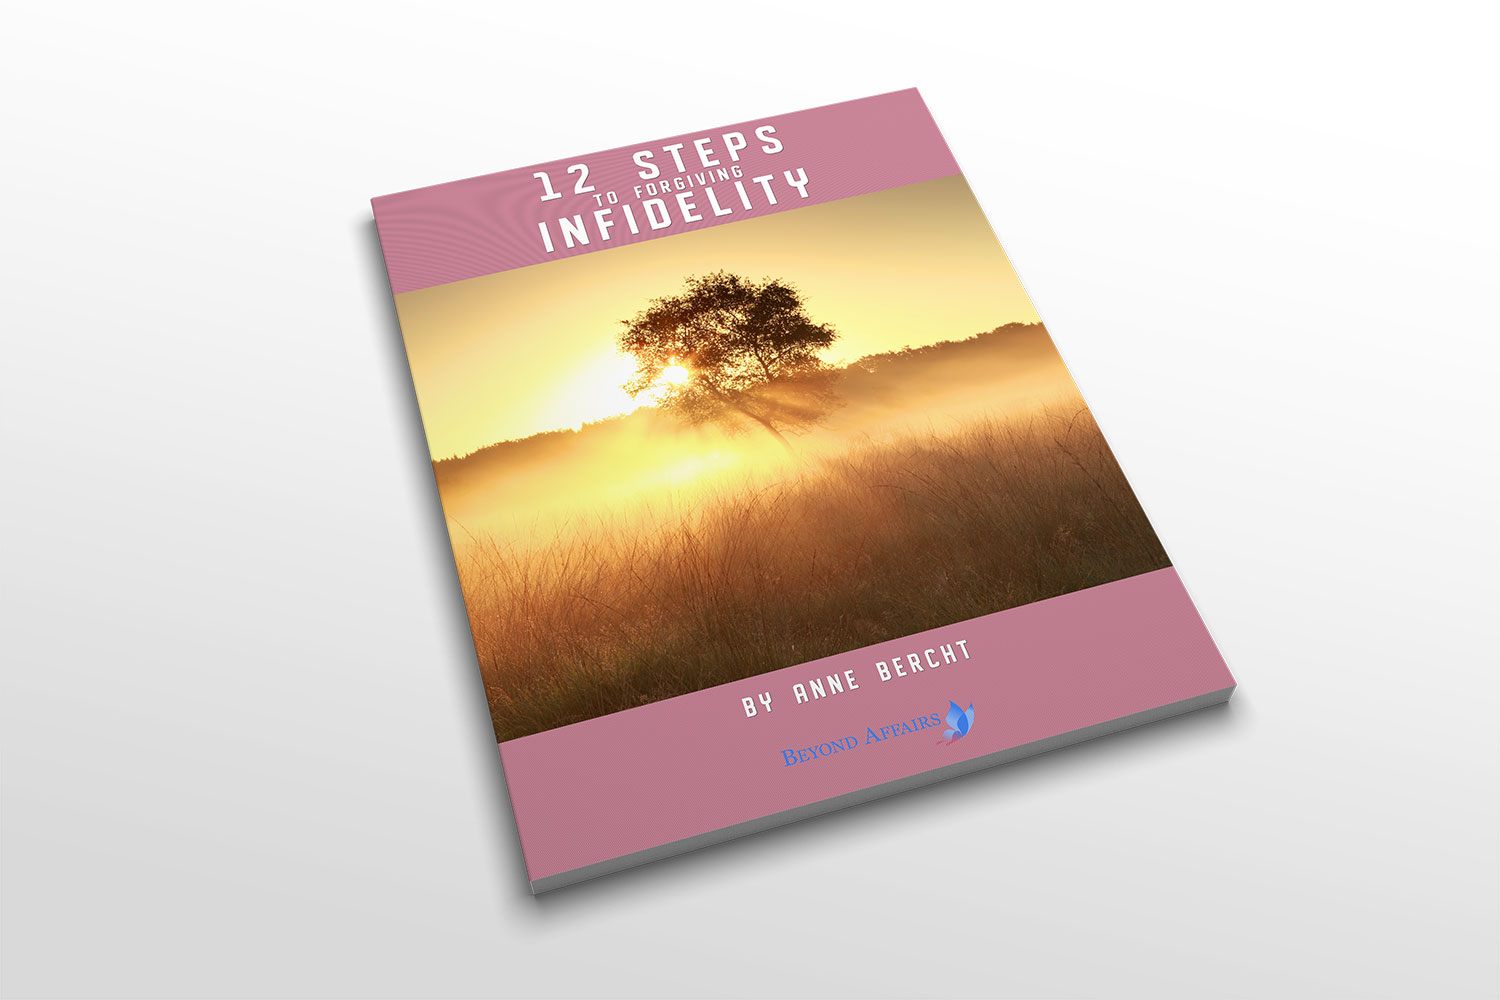 Beyond Affairs special report titled 12 Steps to Forgiving Infidelity